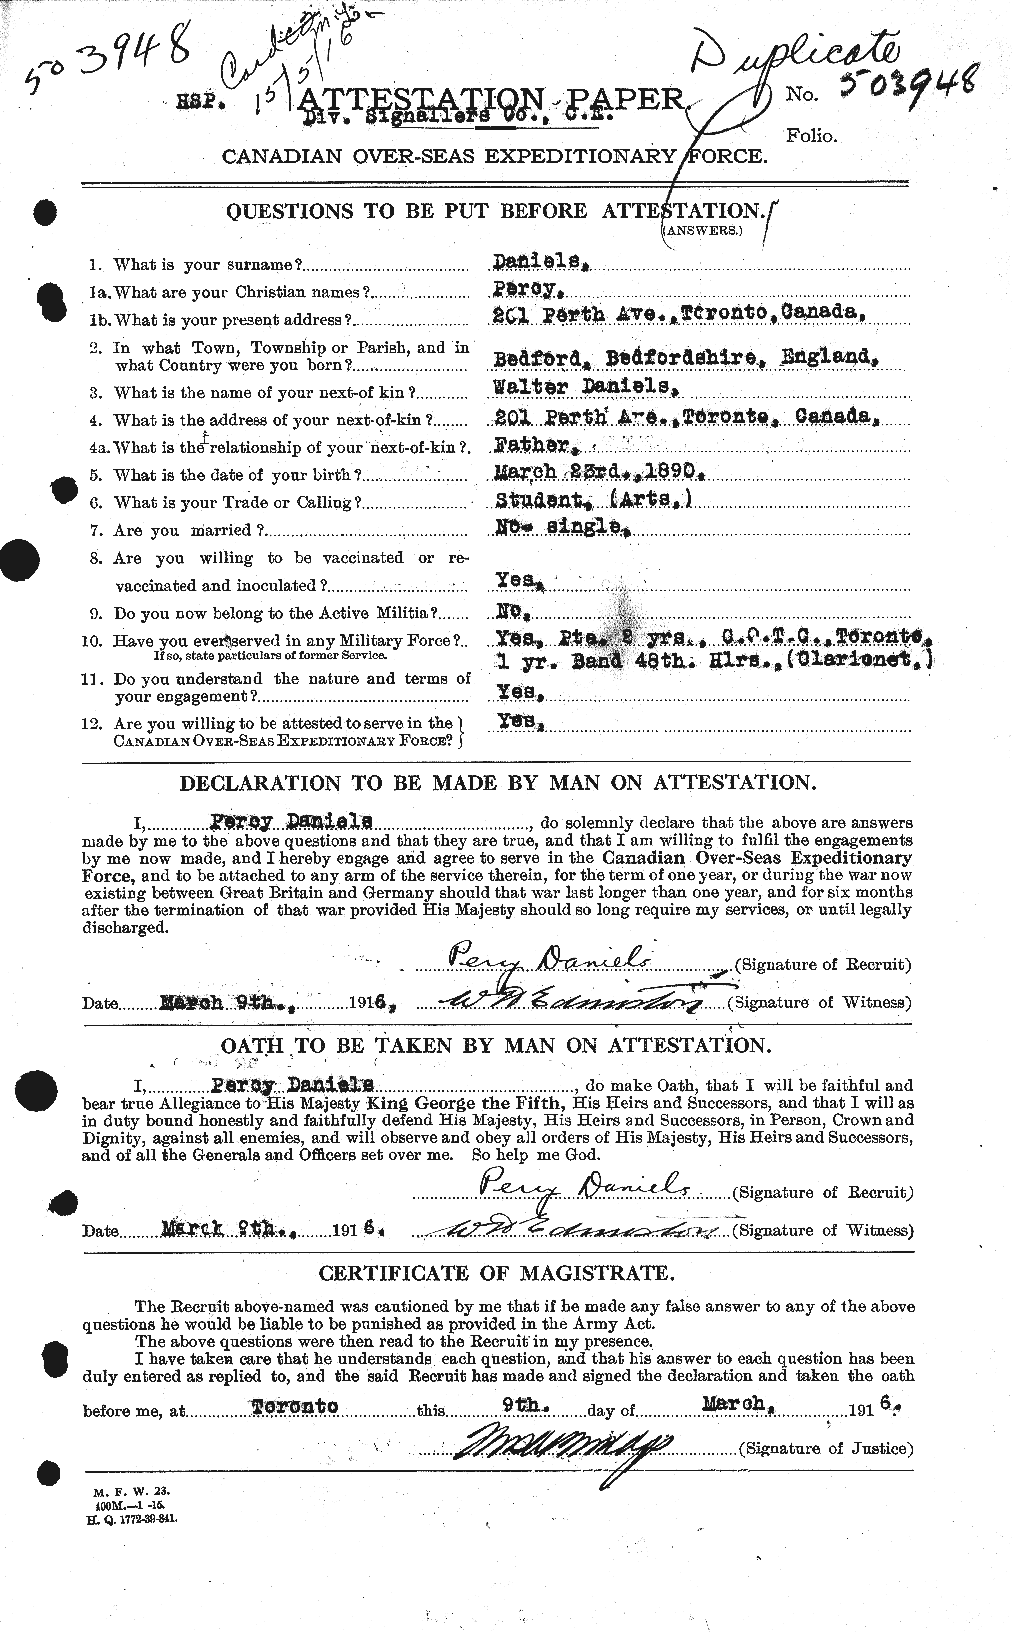 Personnel Records of the First World War - CEF 279660a